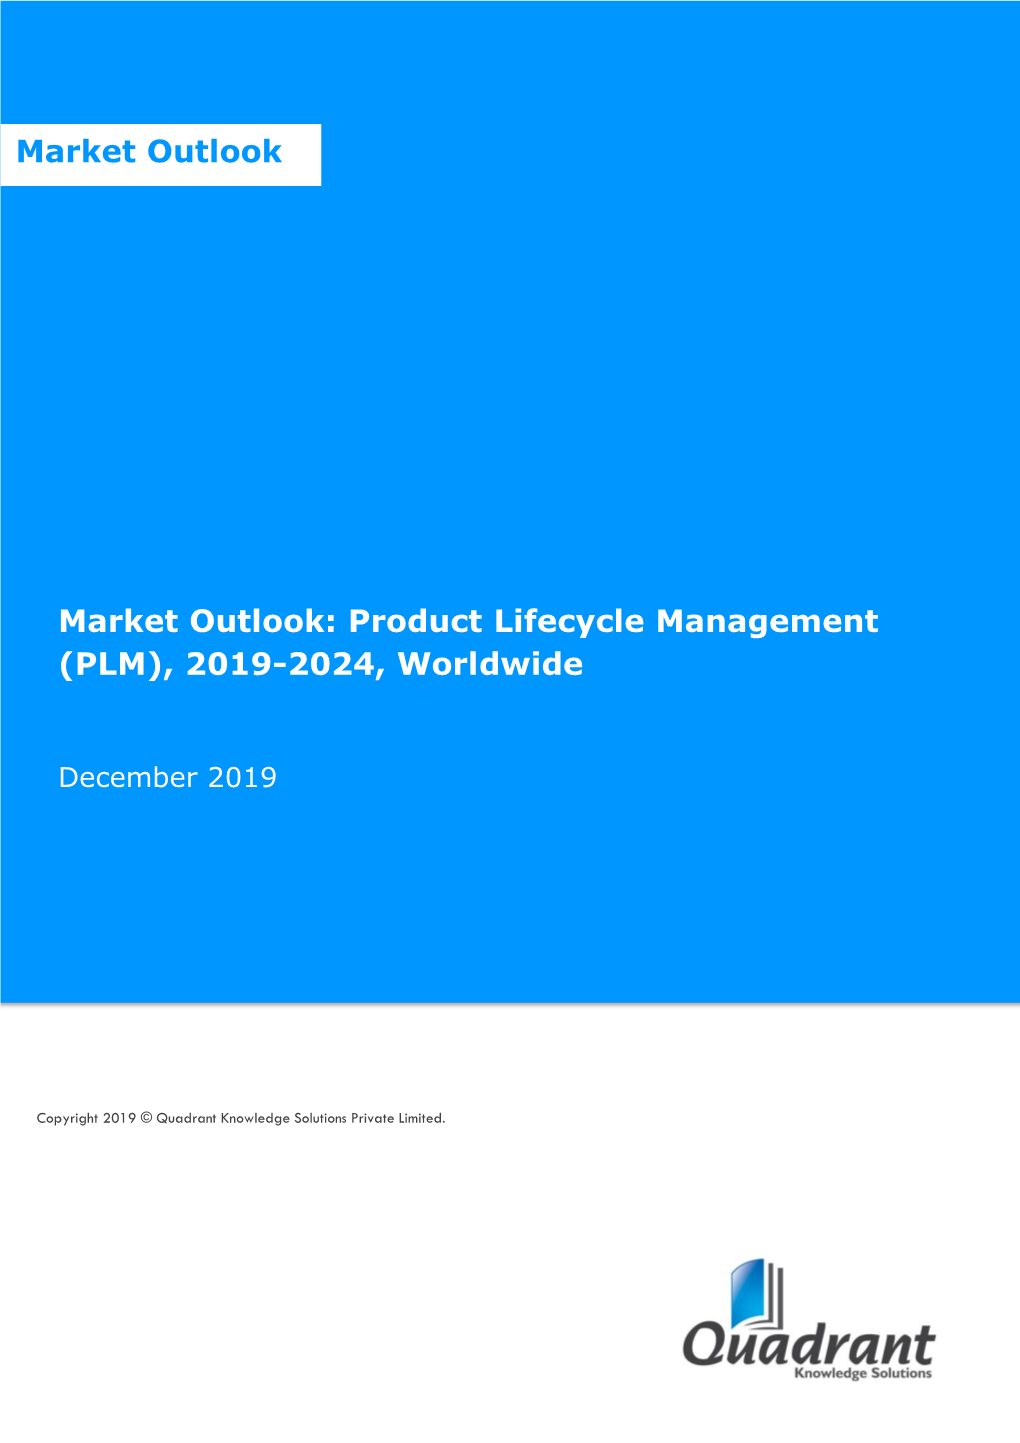 Market Outlook: Product Lifecycle Management (PLM), 2019-2024, Worldwide